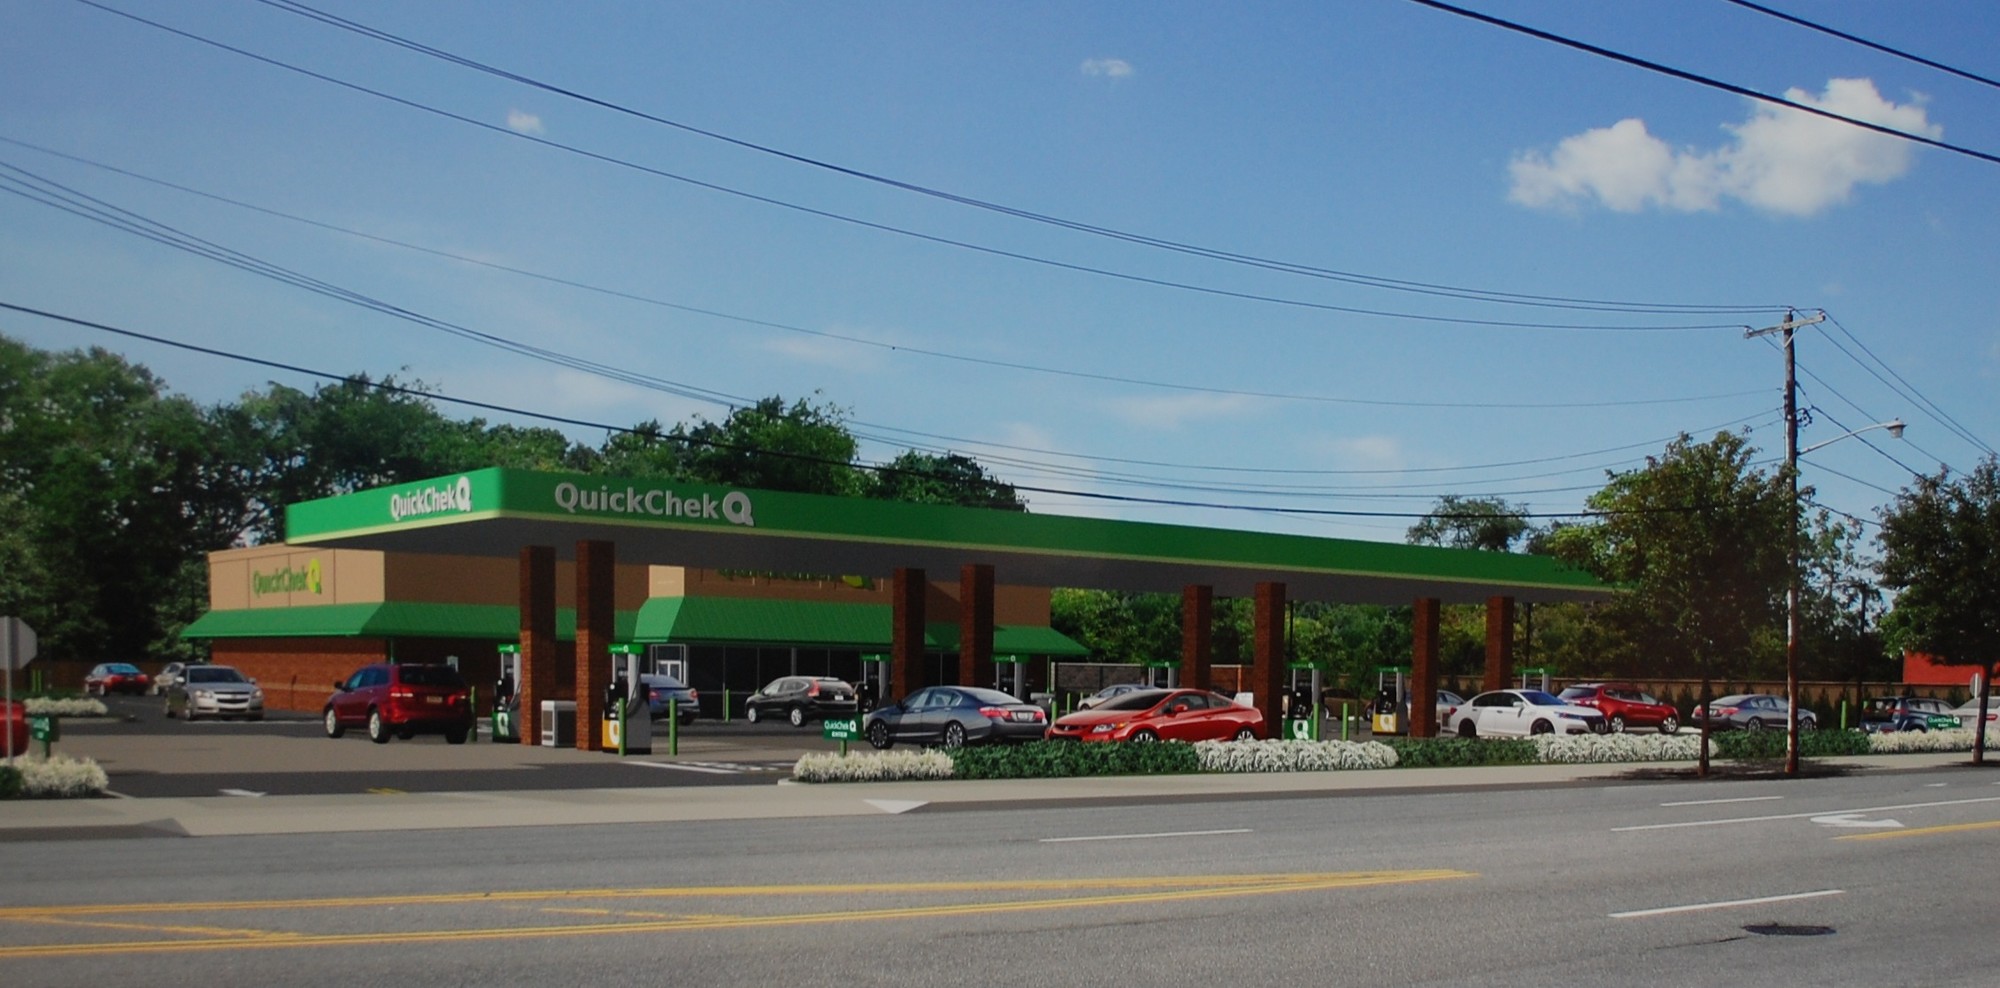 Quickchek is planning to modify its proposal for Merrick Road in Seaford.